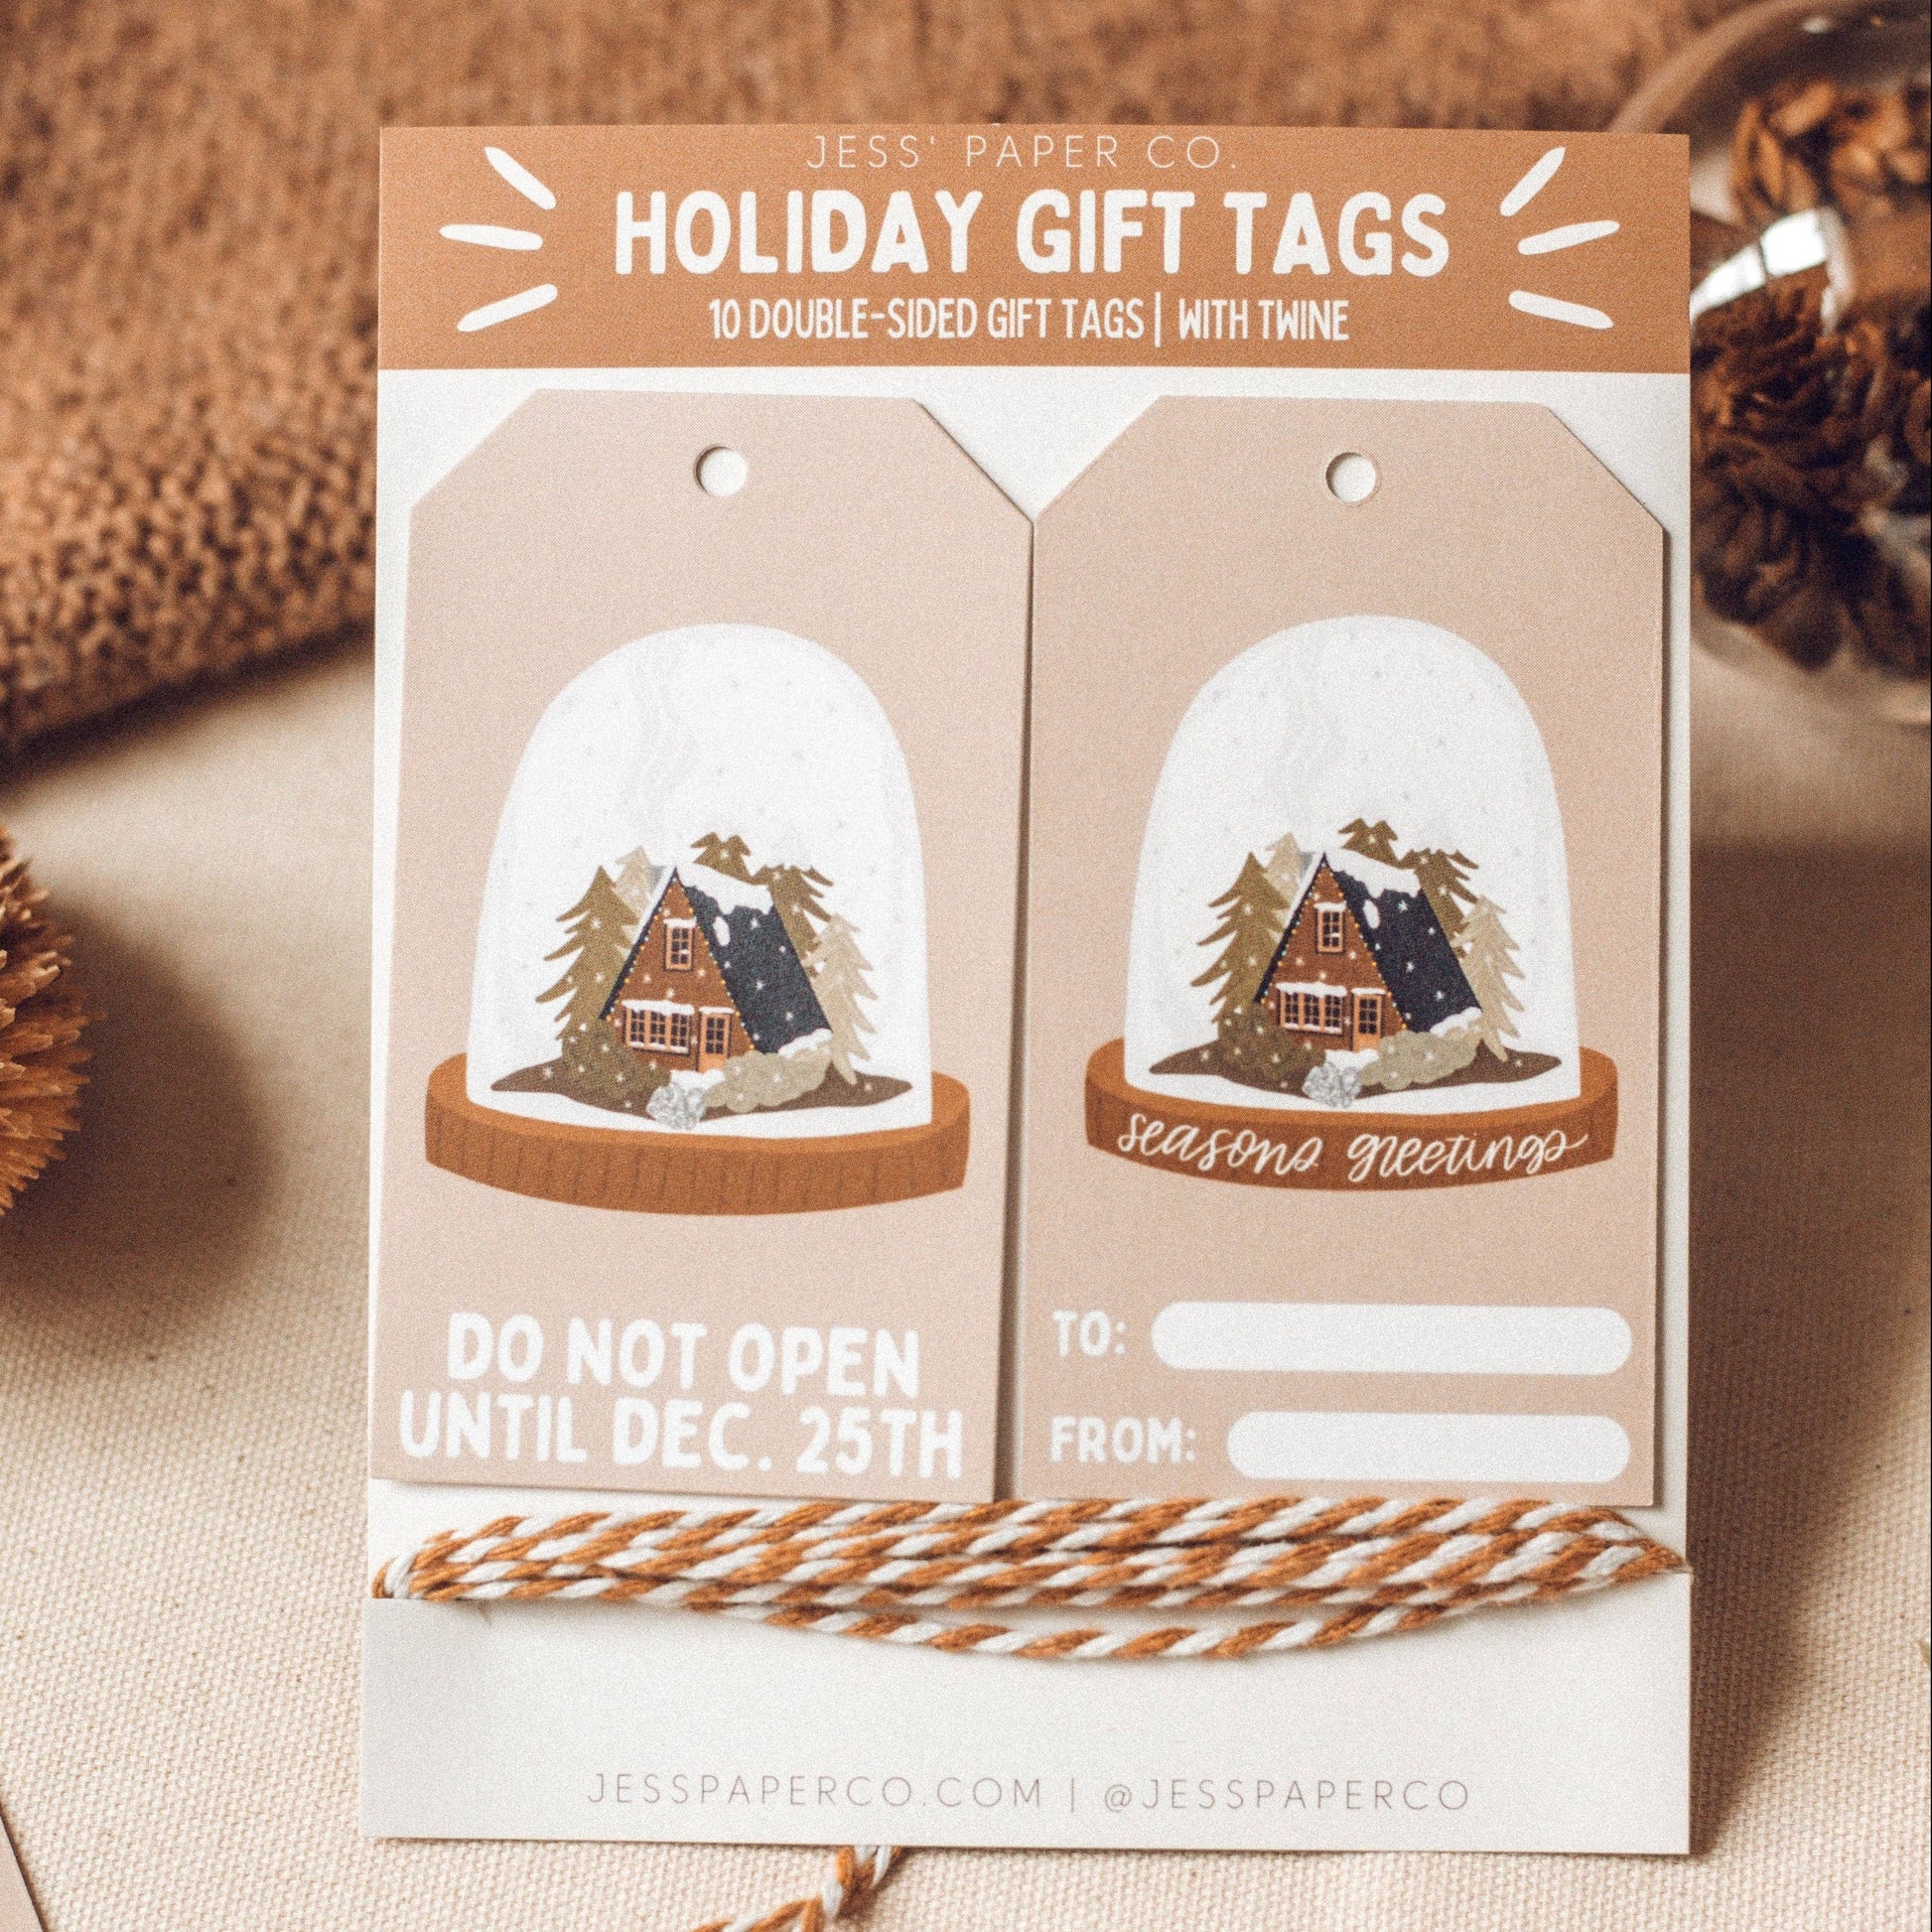 Snow Globe Holiday Gift Tags with Twine Home Goods Jess' Paper Co.   